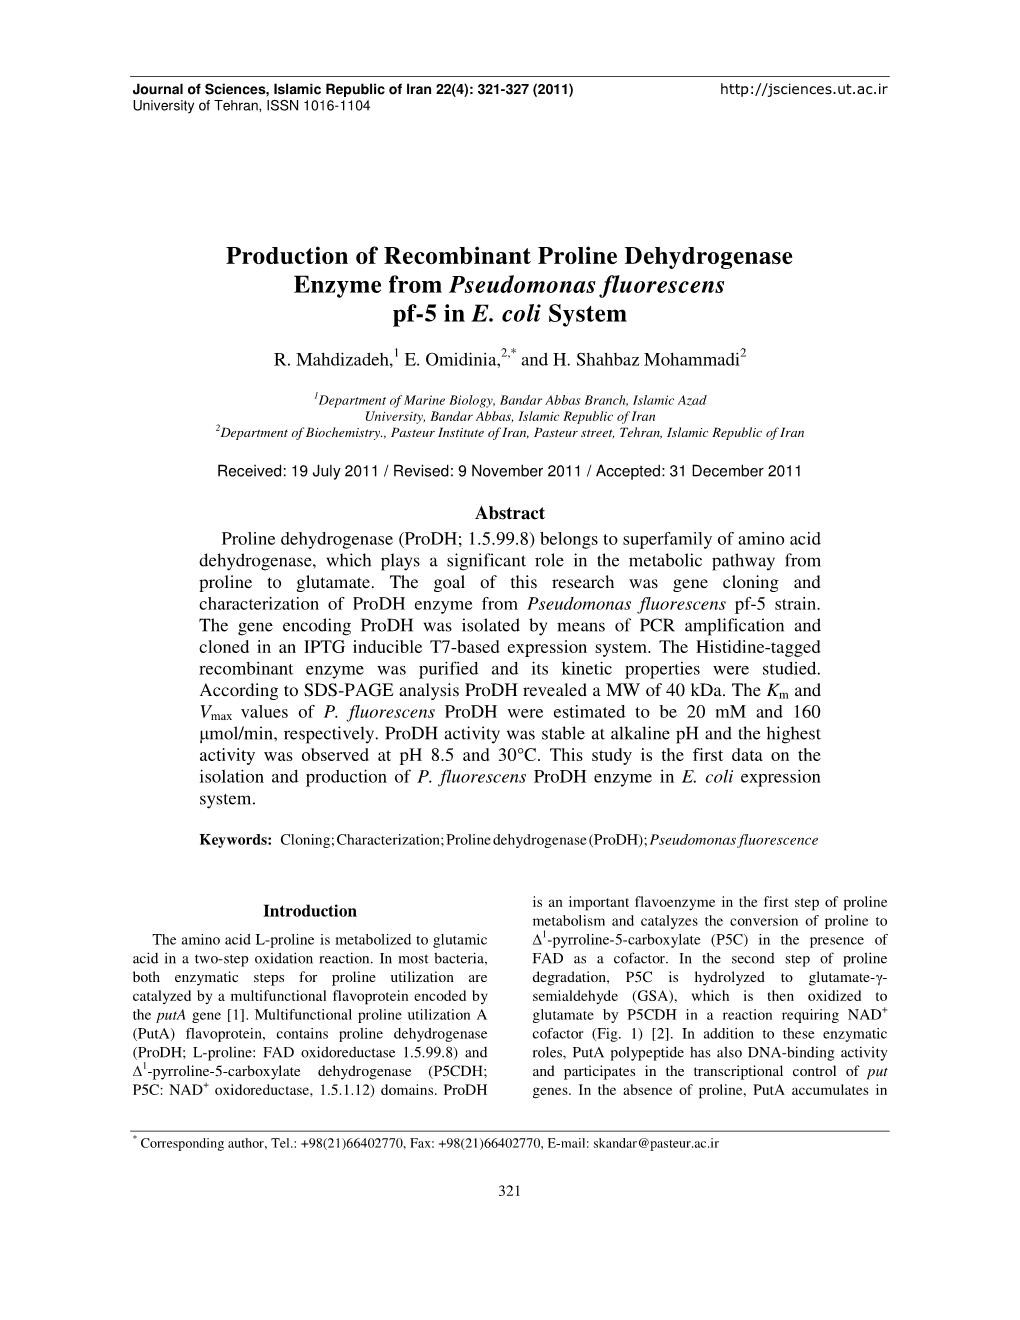 Production of Recombinant Proline Dehydrogenase Enzyme from Pseudomonas Fluorescens Pf-5 in E